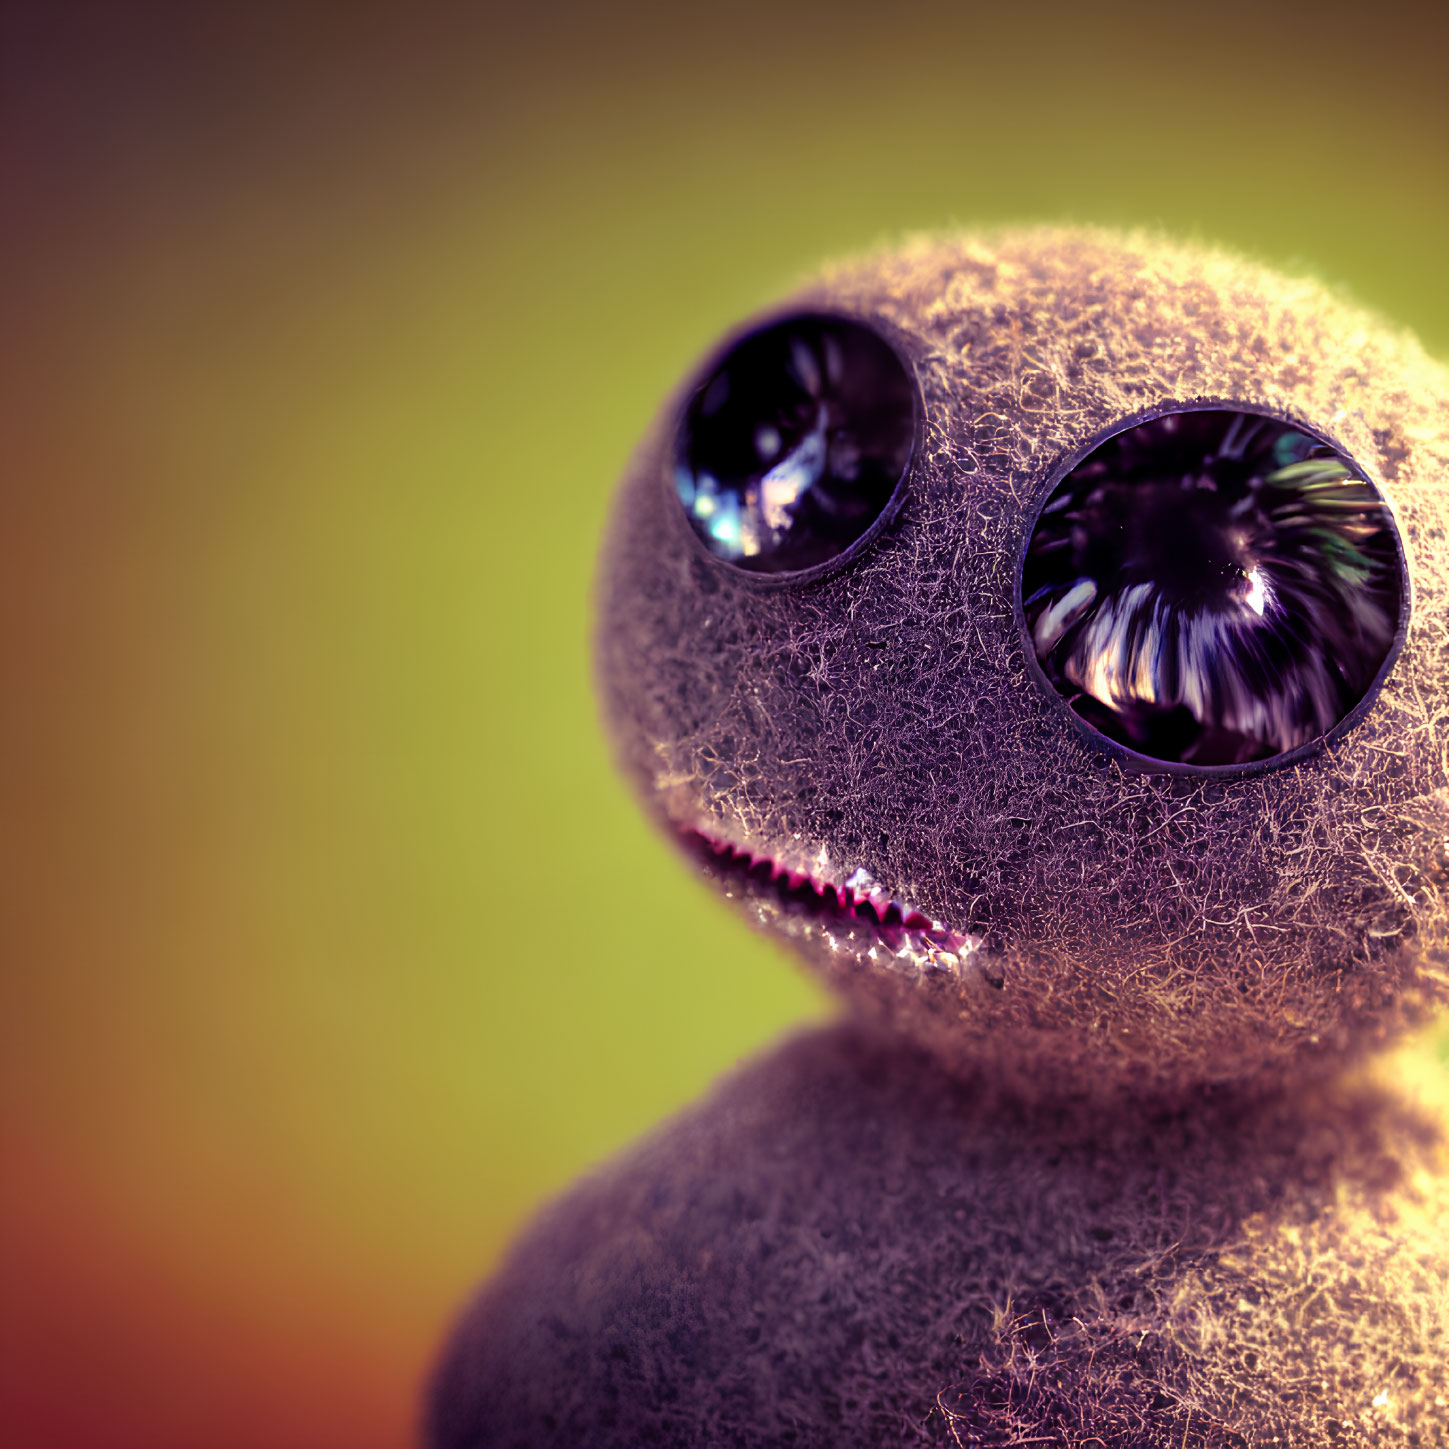 Furry round creature with black eyes and smiling mouth on gradient background